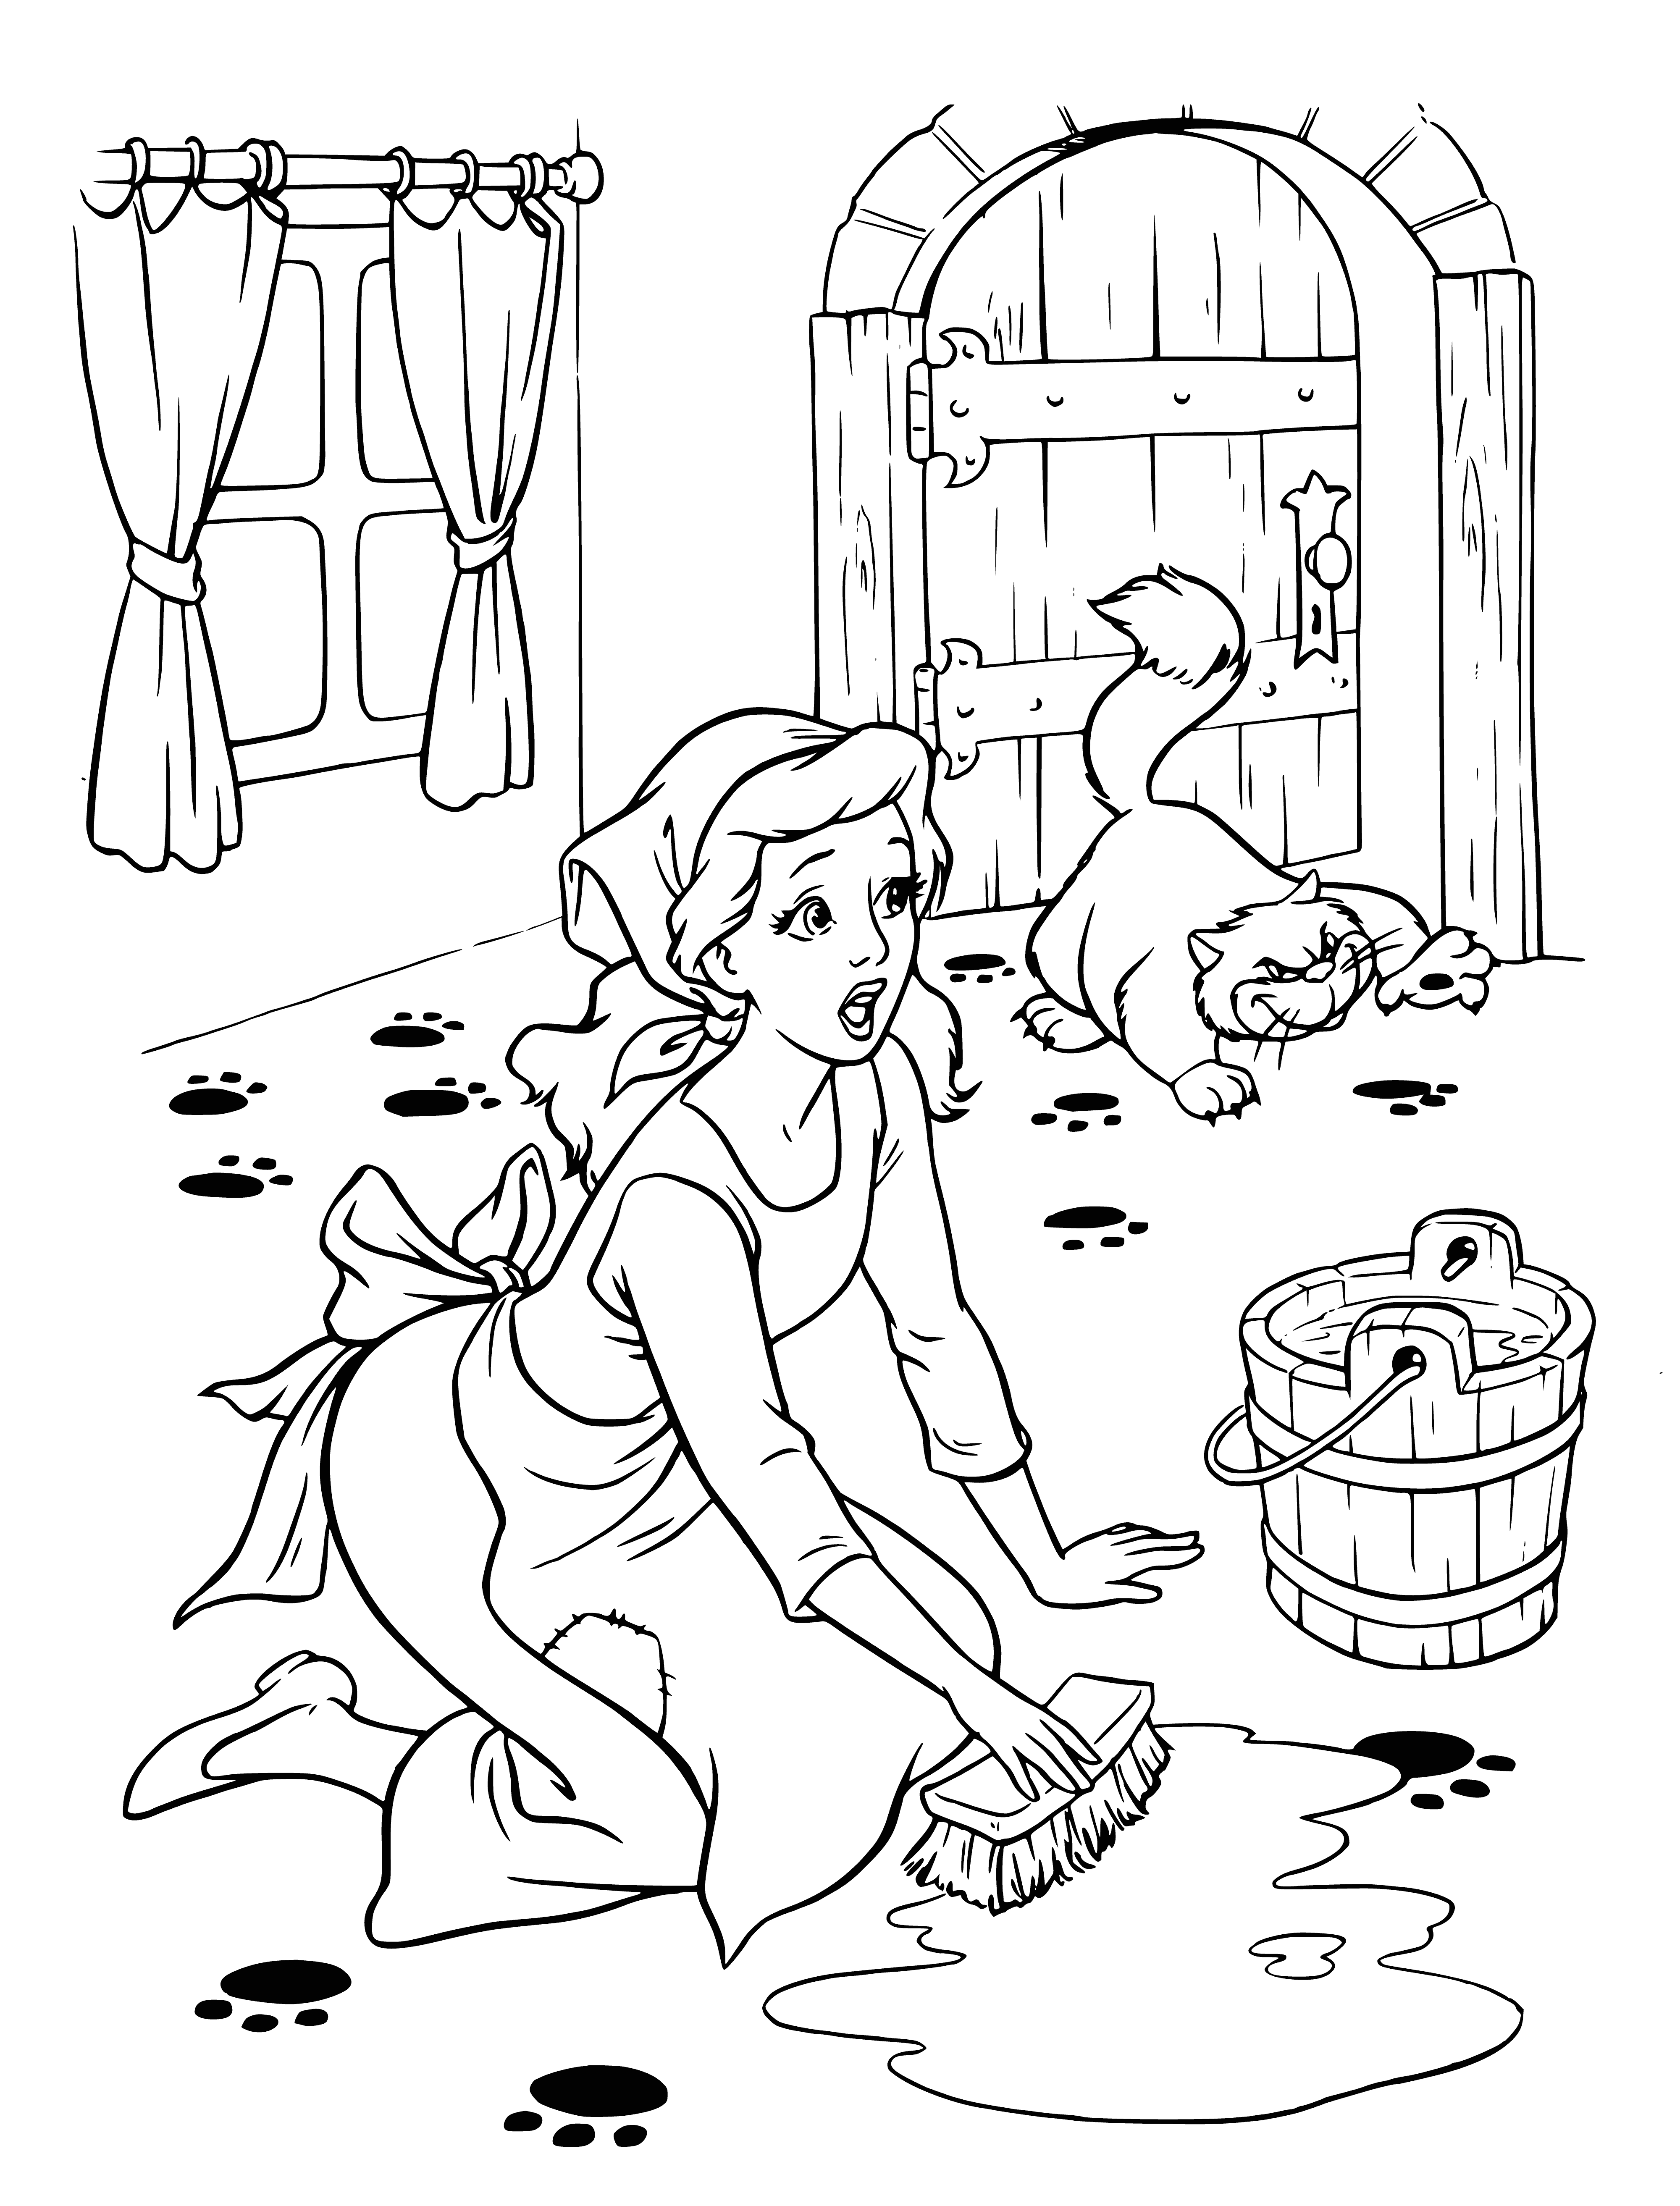 coloring page: Cinderella: blonde hair, blue gown, silver crown, pink flower. A fairytale princess come to life!